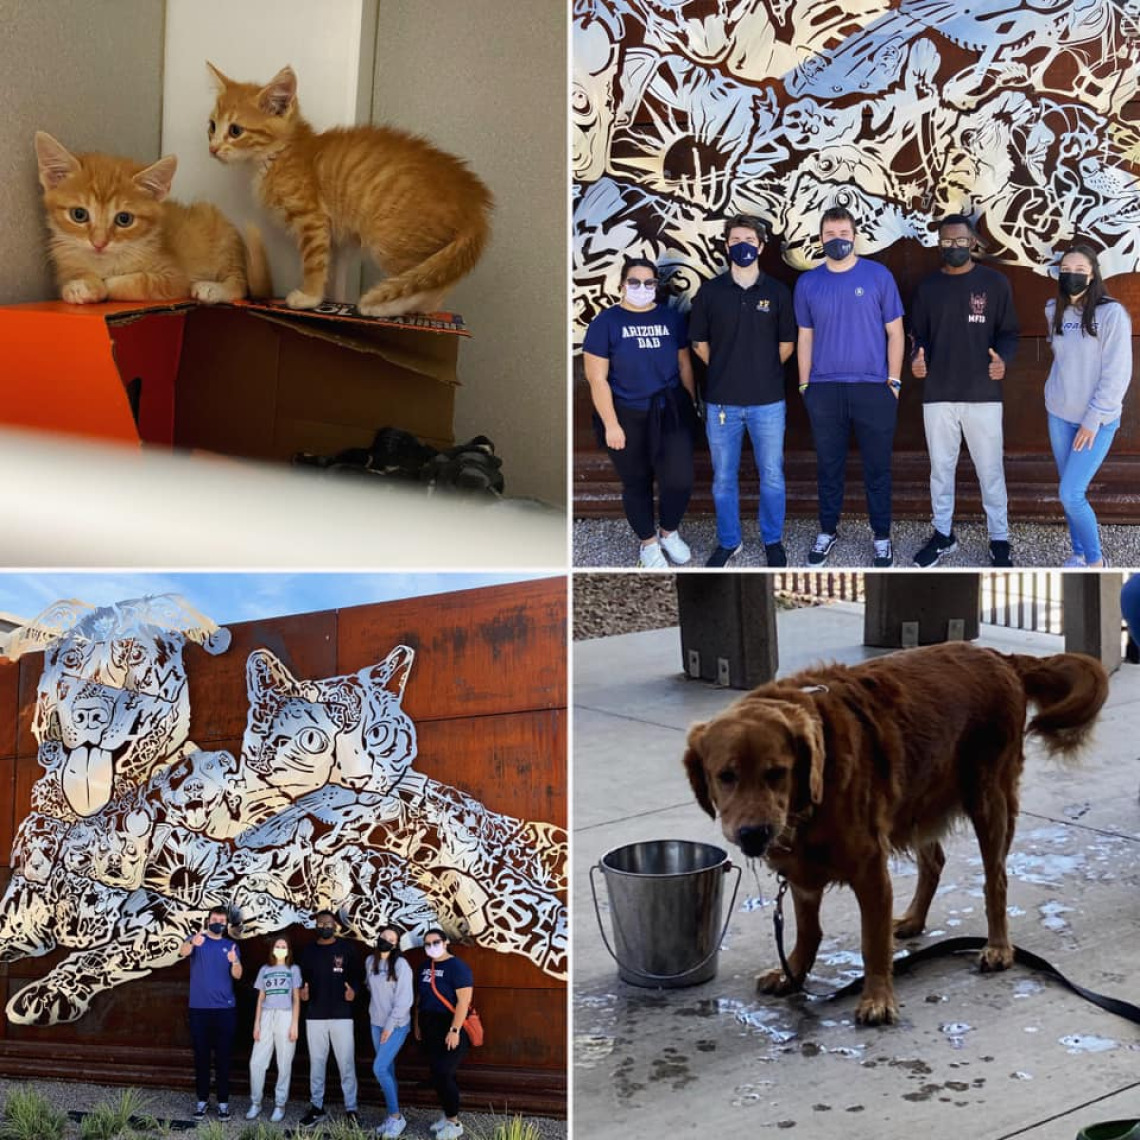 Montage of cats, a dog, and students standing in front of PACC building.